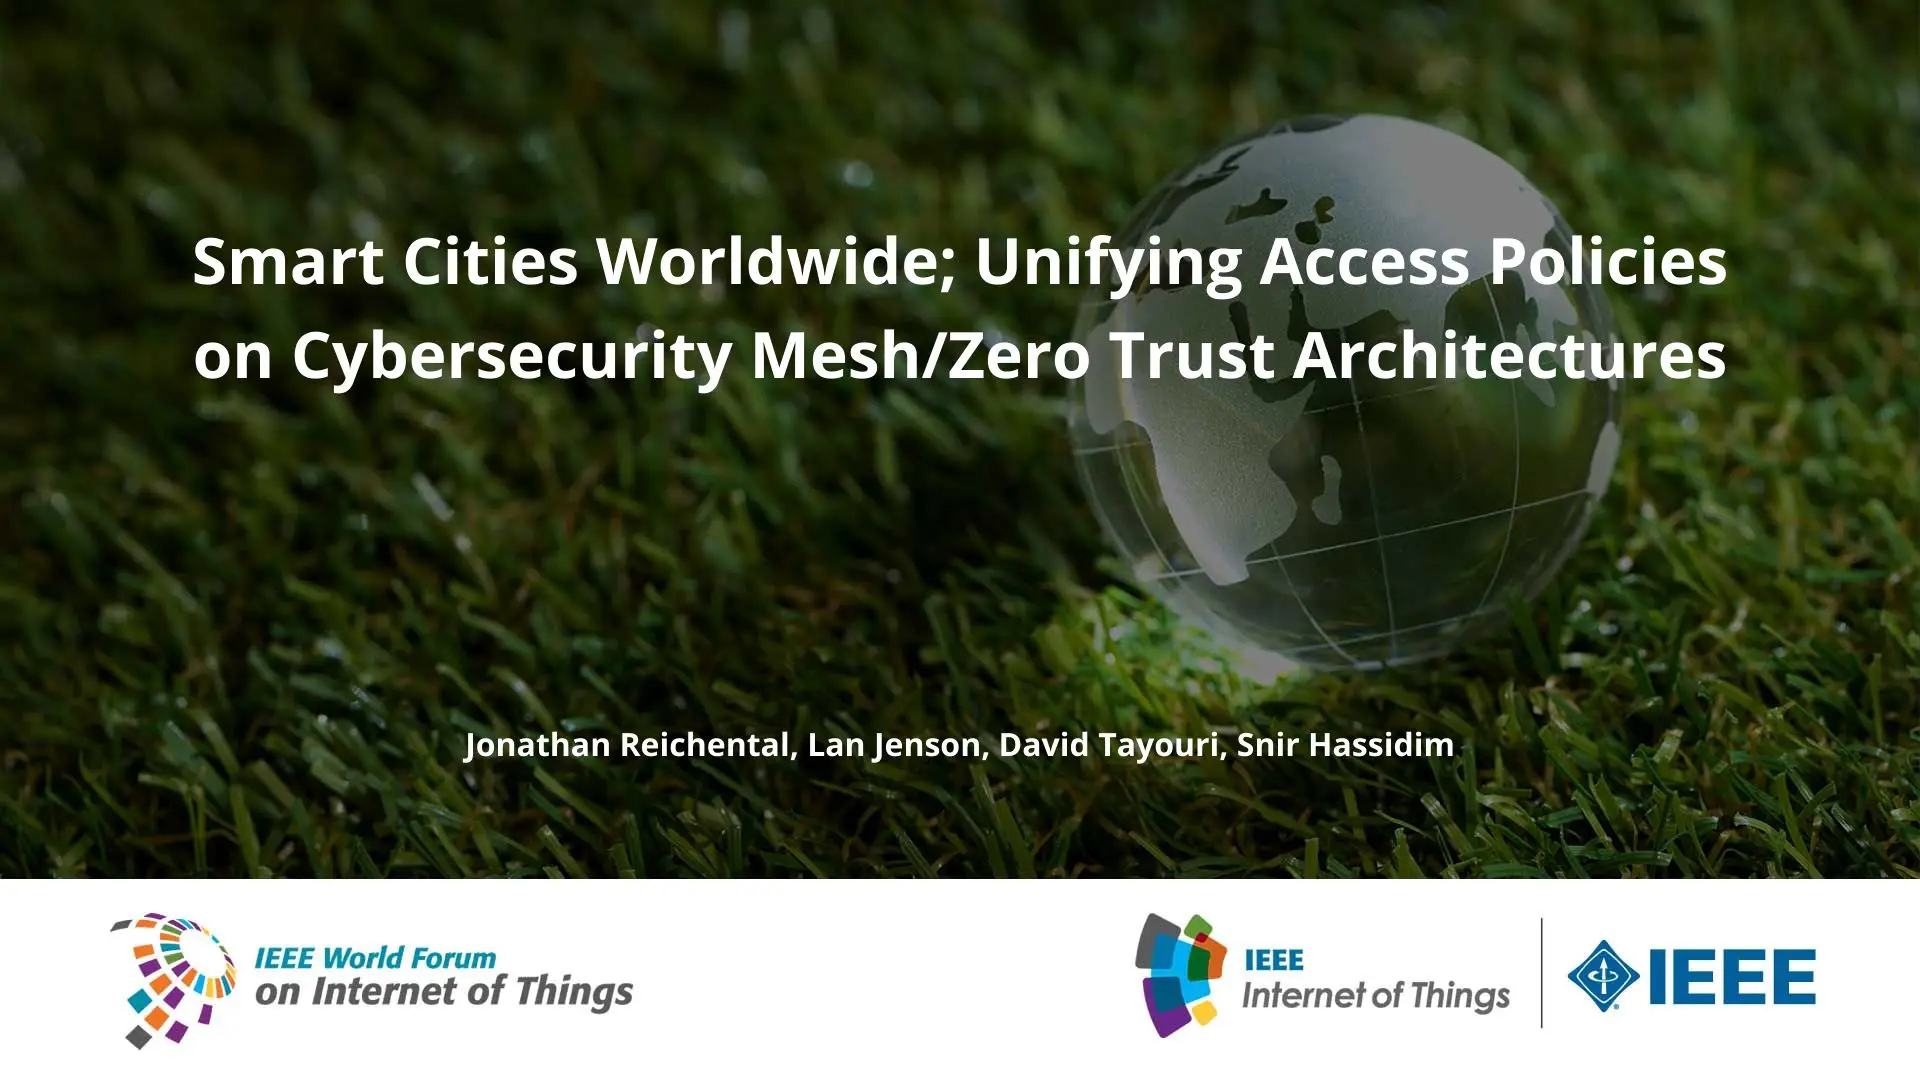 Smart Cities Worldwide; Unifying Access Policies on Cybersecurity Mesh/Zero Trust Architectures